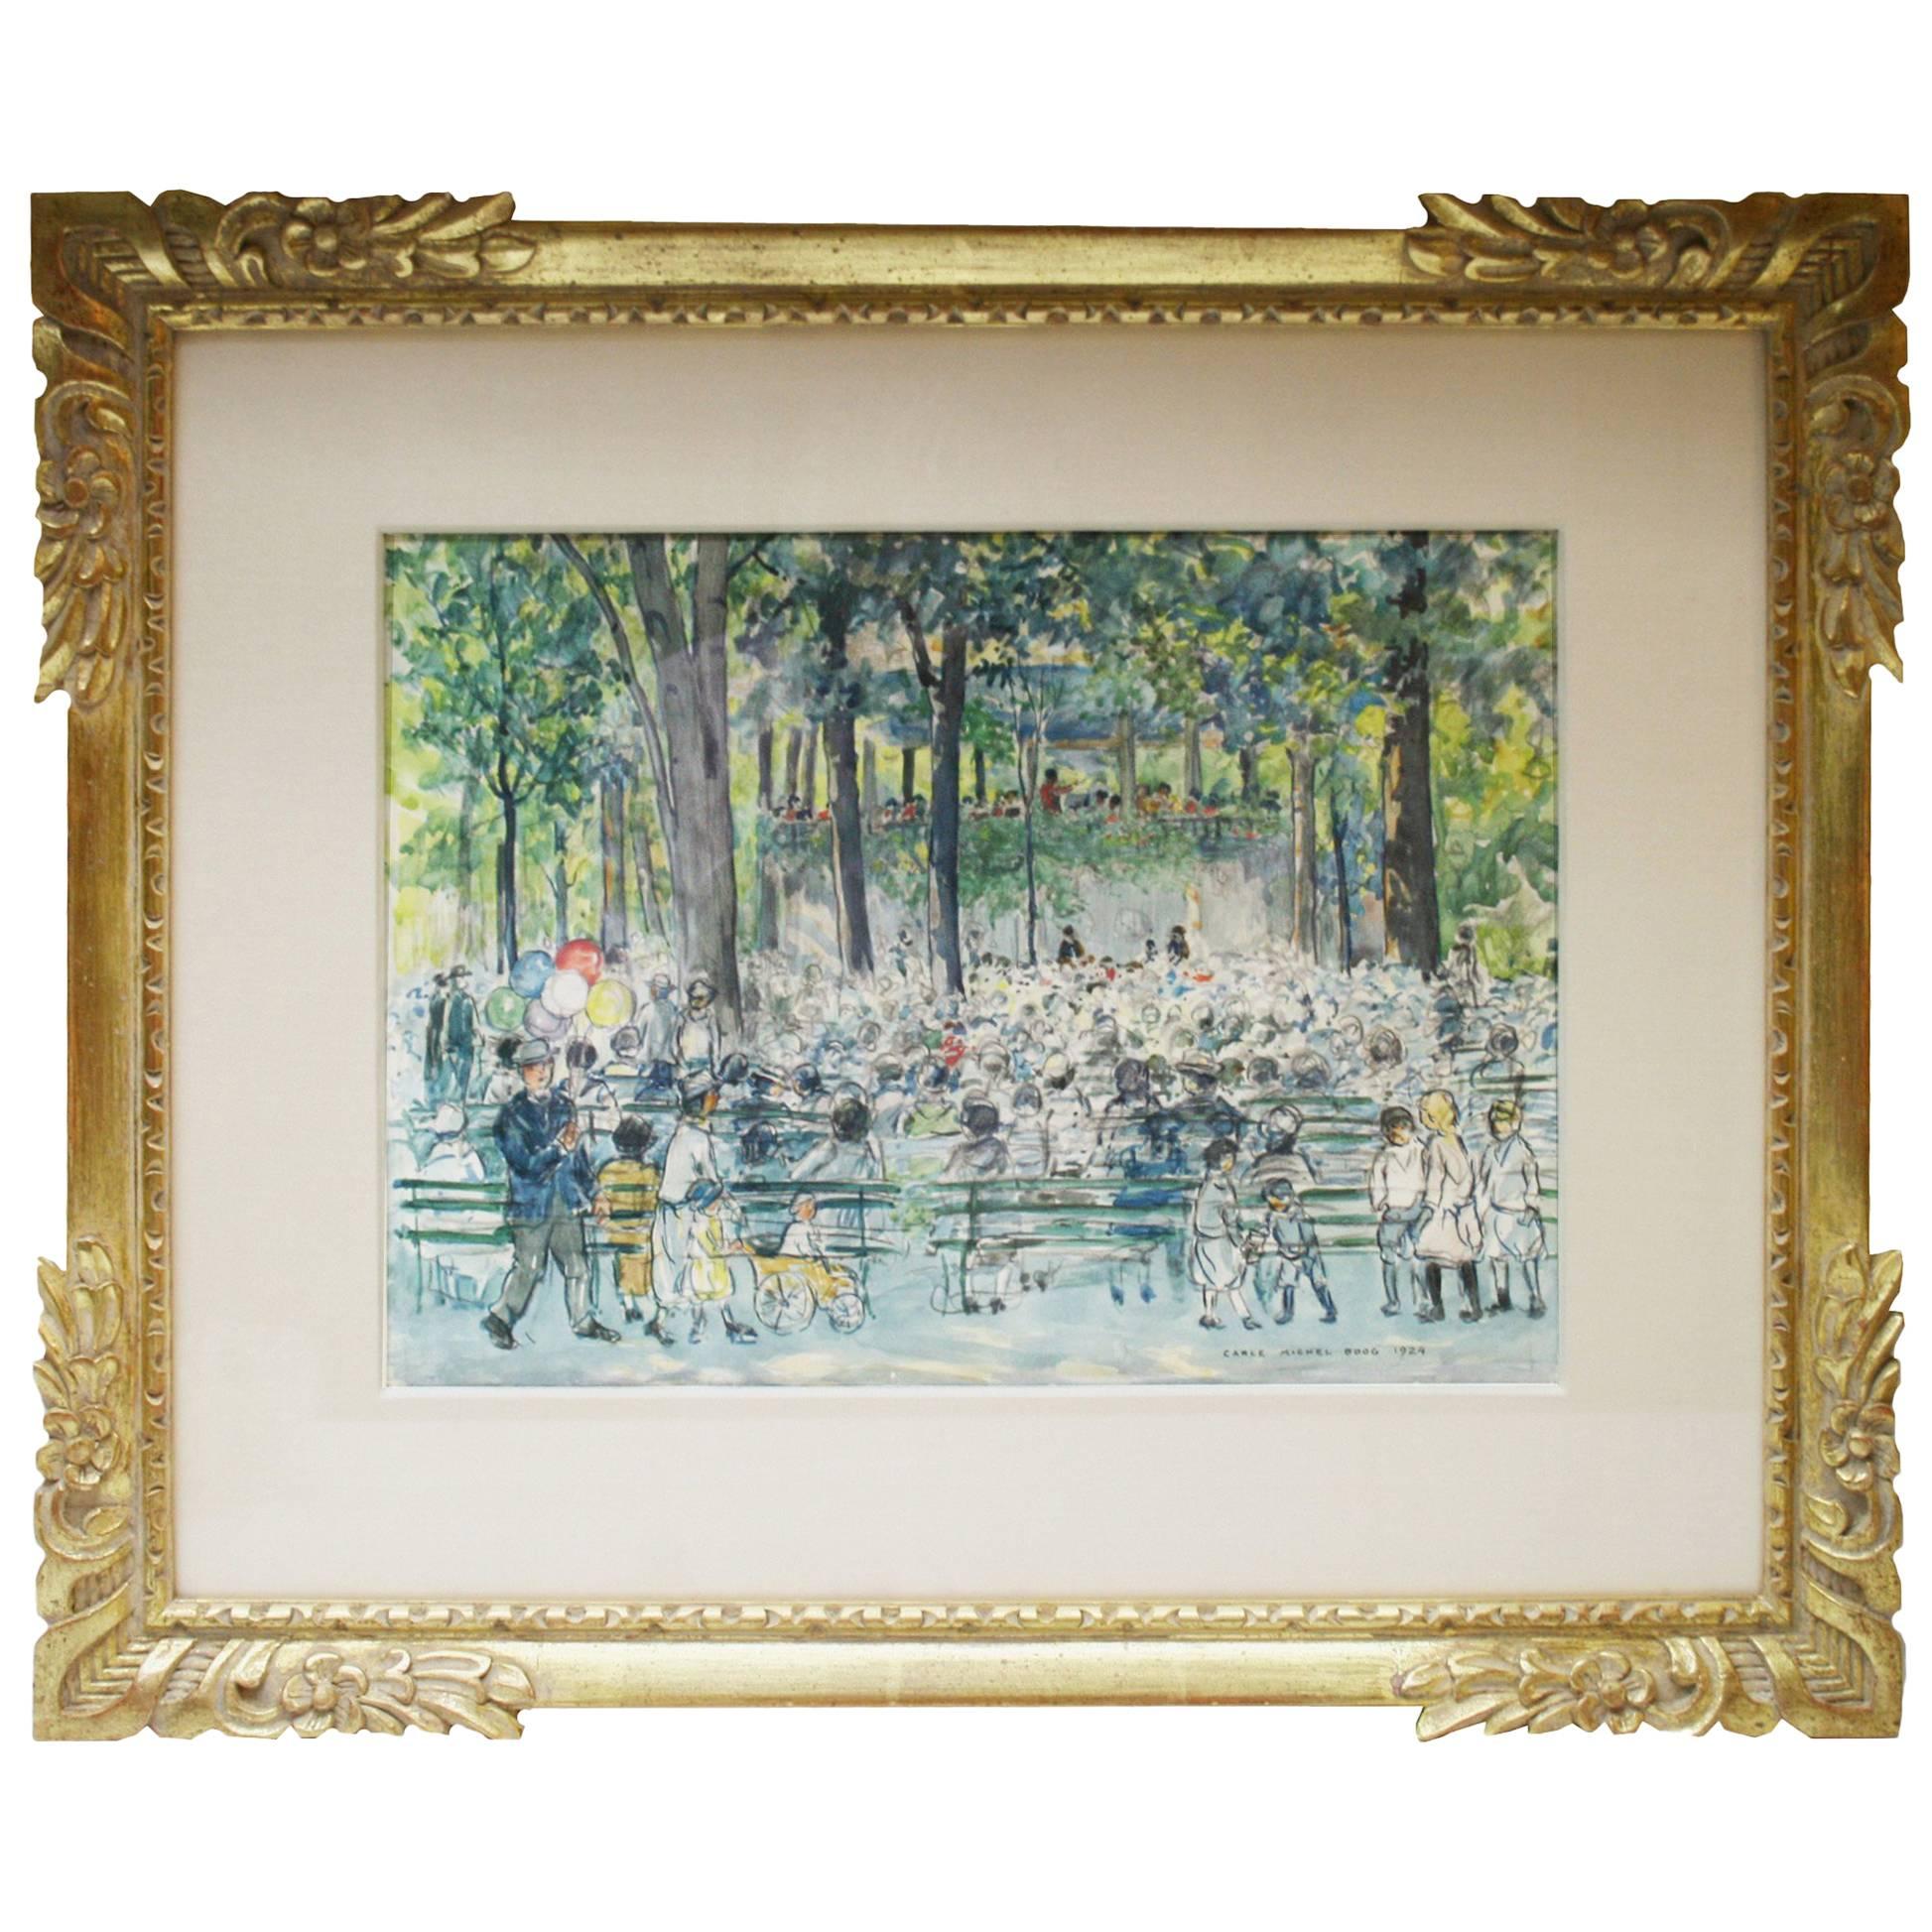 "Concert in Central Park" a Watercolor by Carle Michel Boog